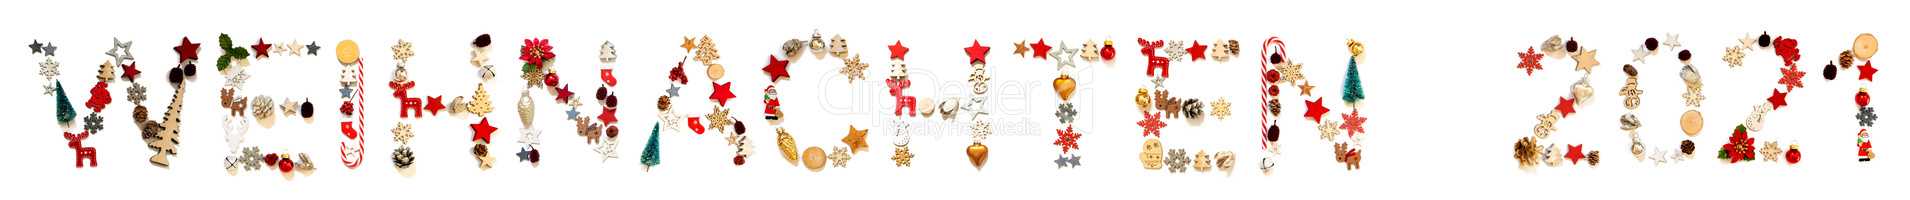 Colorful Christmas Decoration Letter Building Weihnachten 2021 Means Christmas